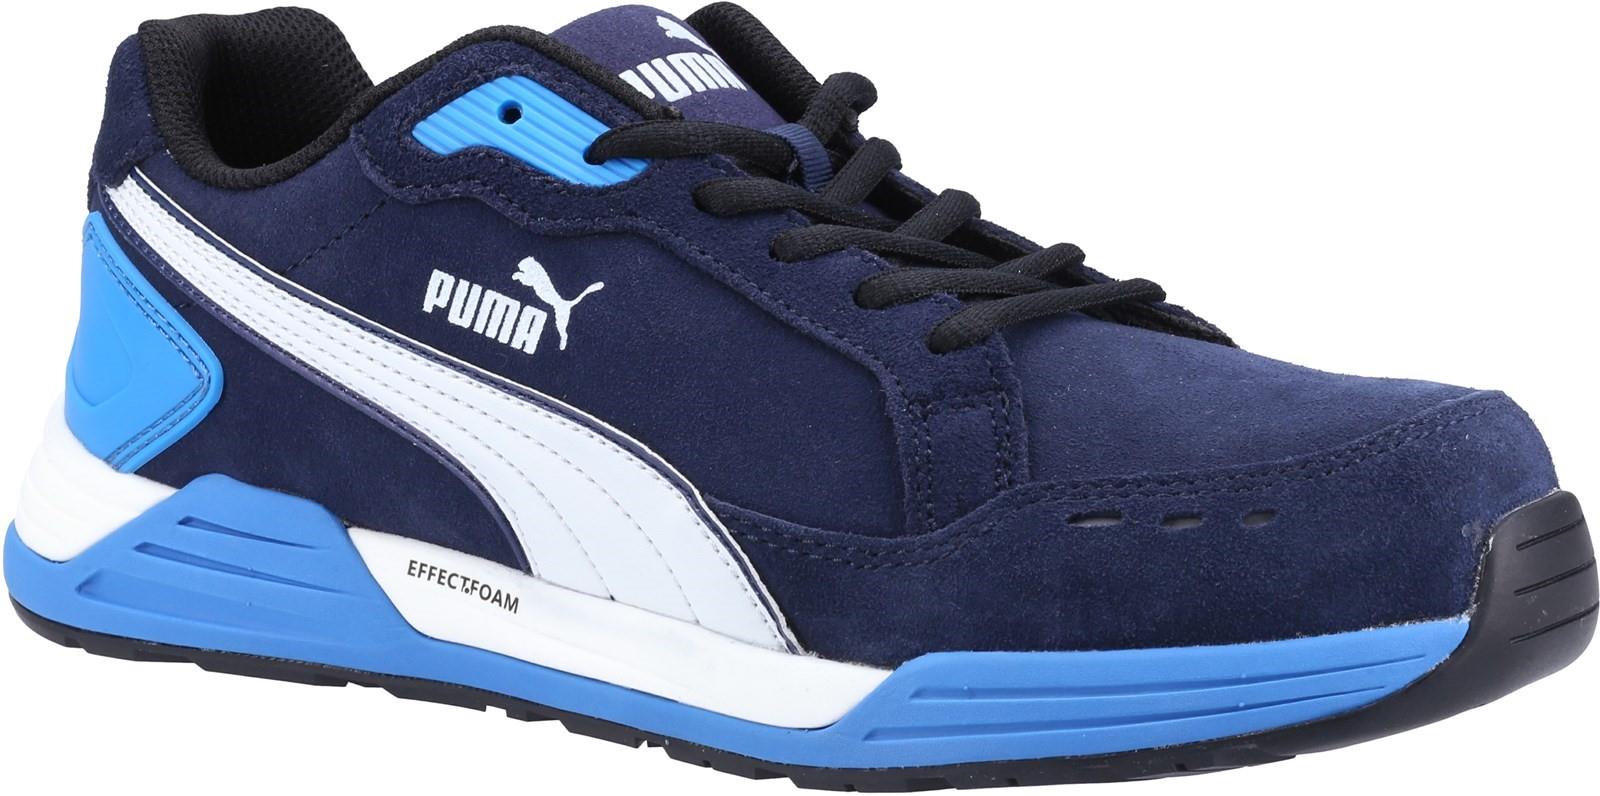 Puma Airtwist Low S3 blue composite toe/midsole work safety trainers shoes